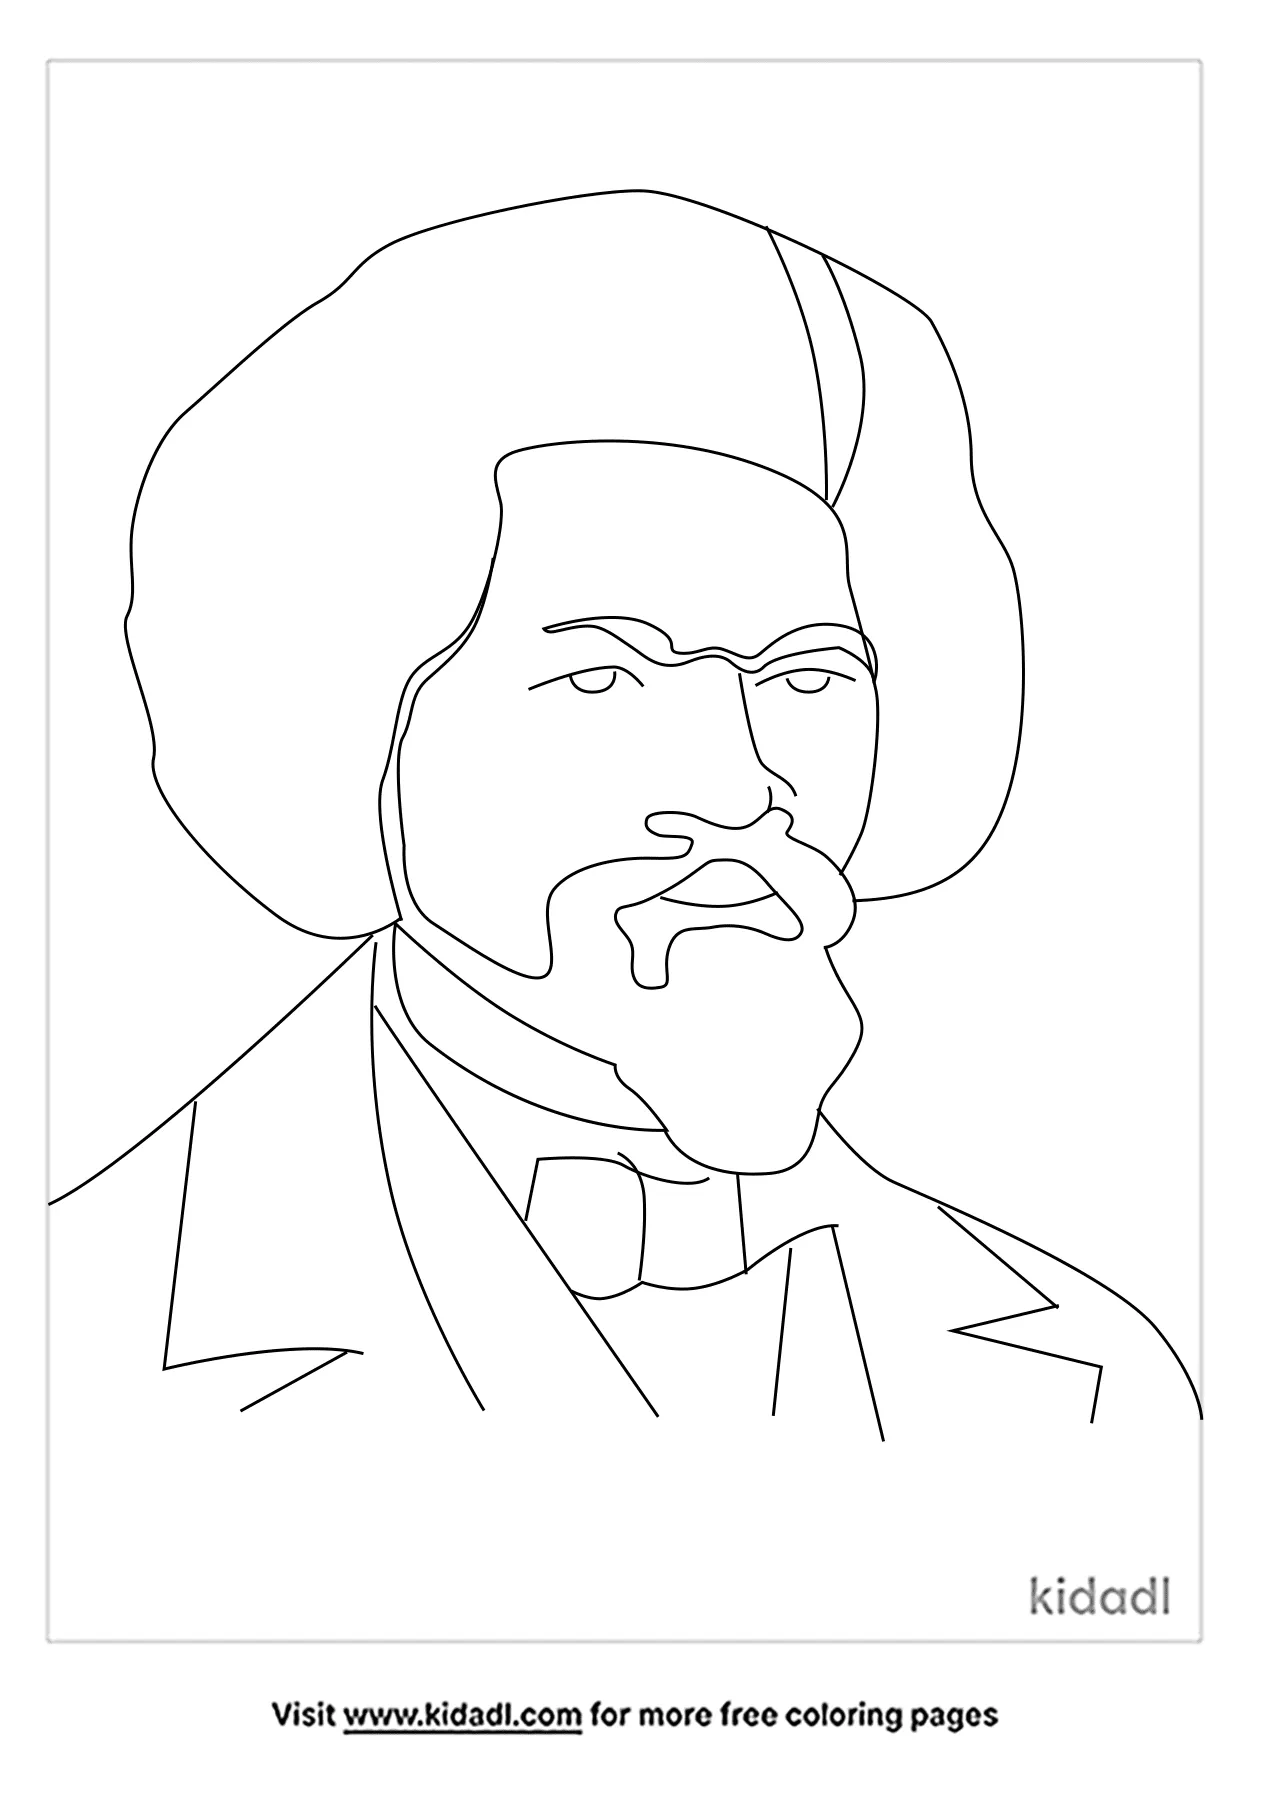 free-frederick-douglass-coloring-page-coloring-page-printables-kidadl